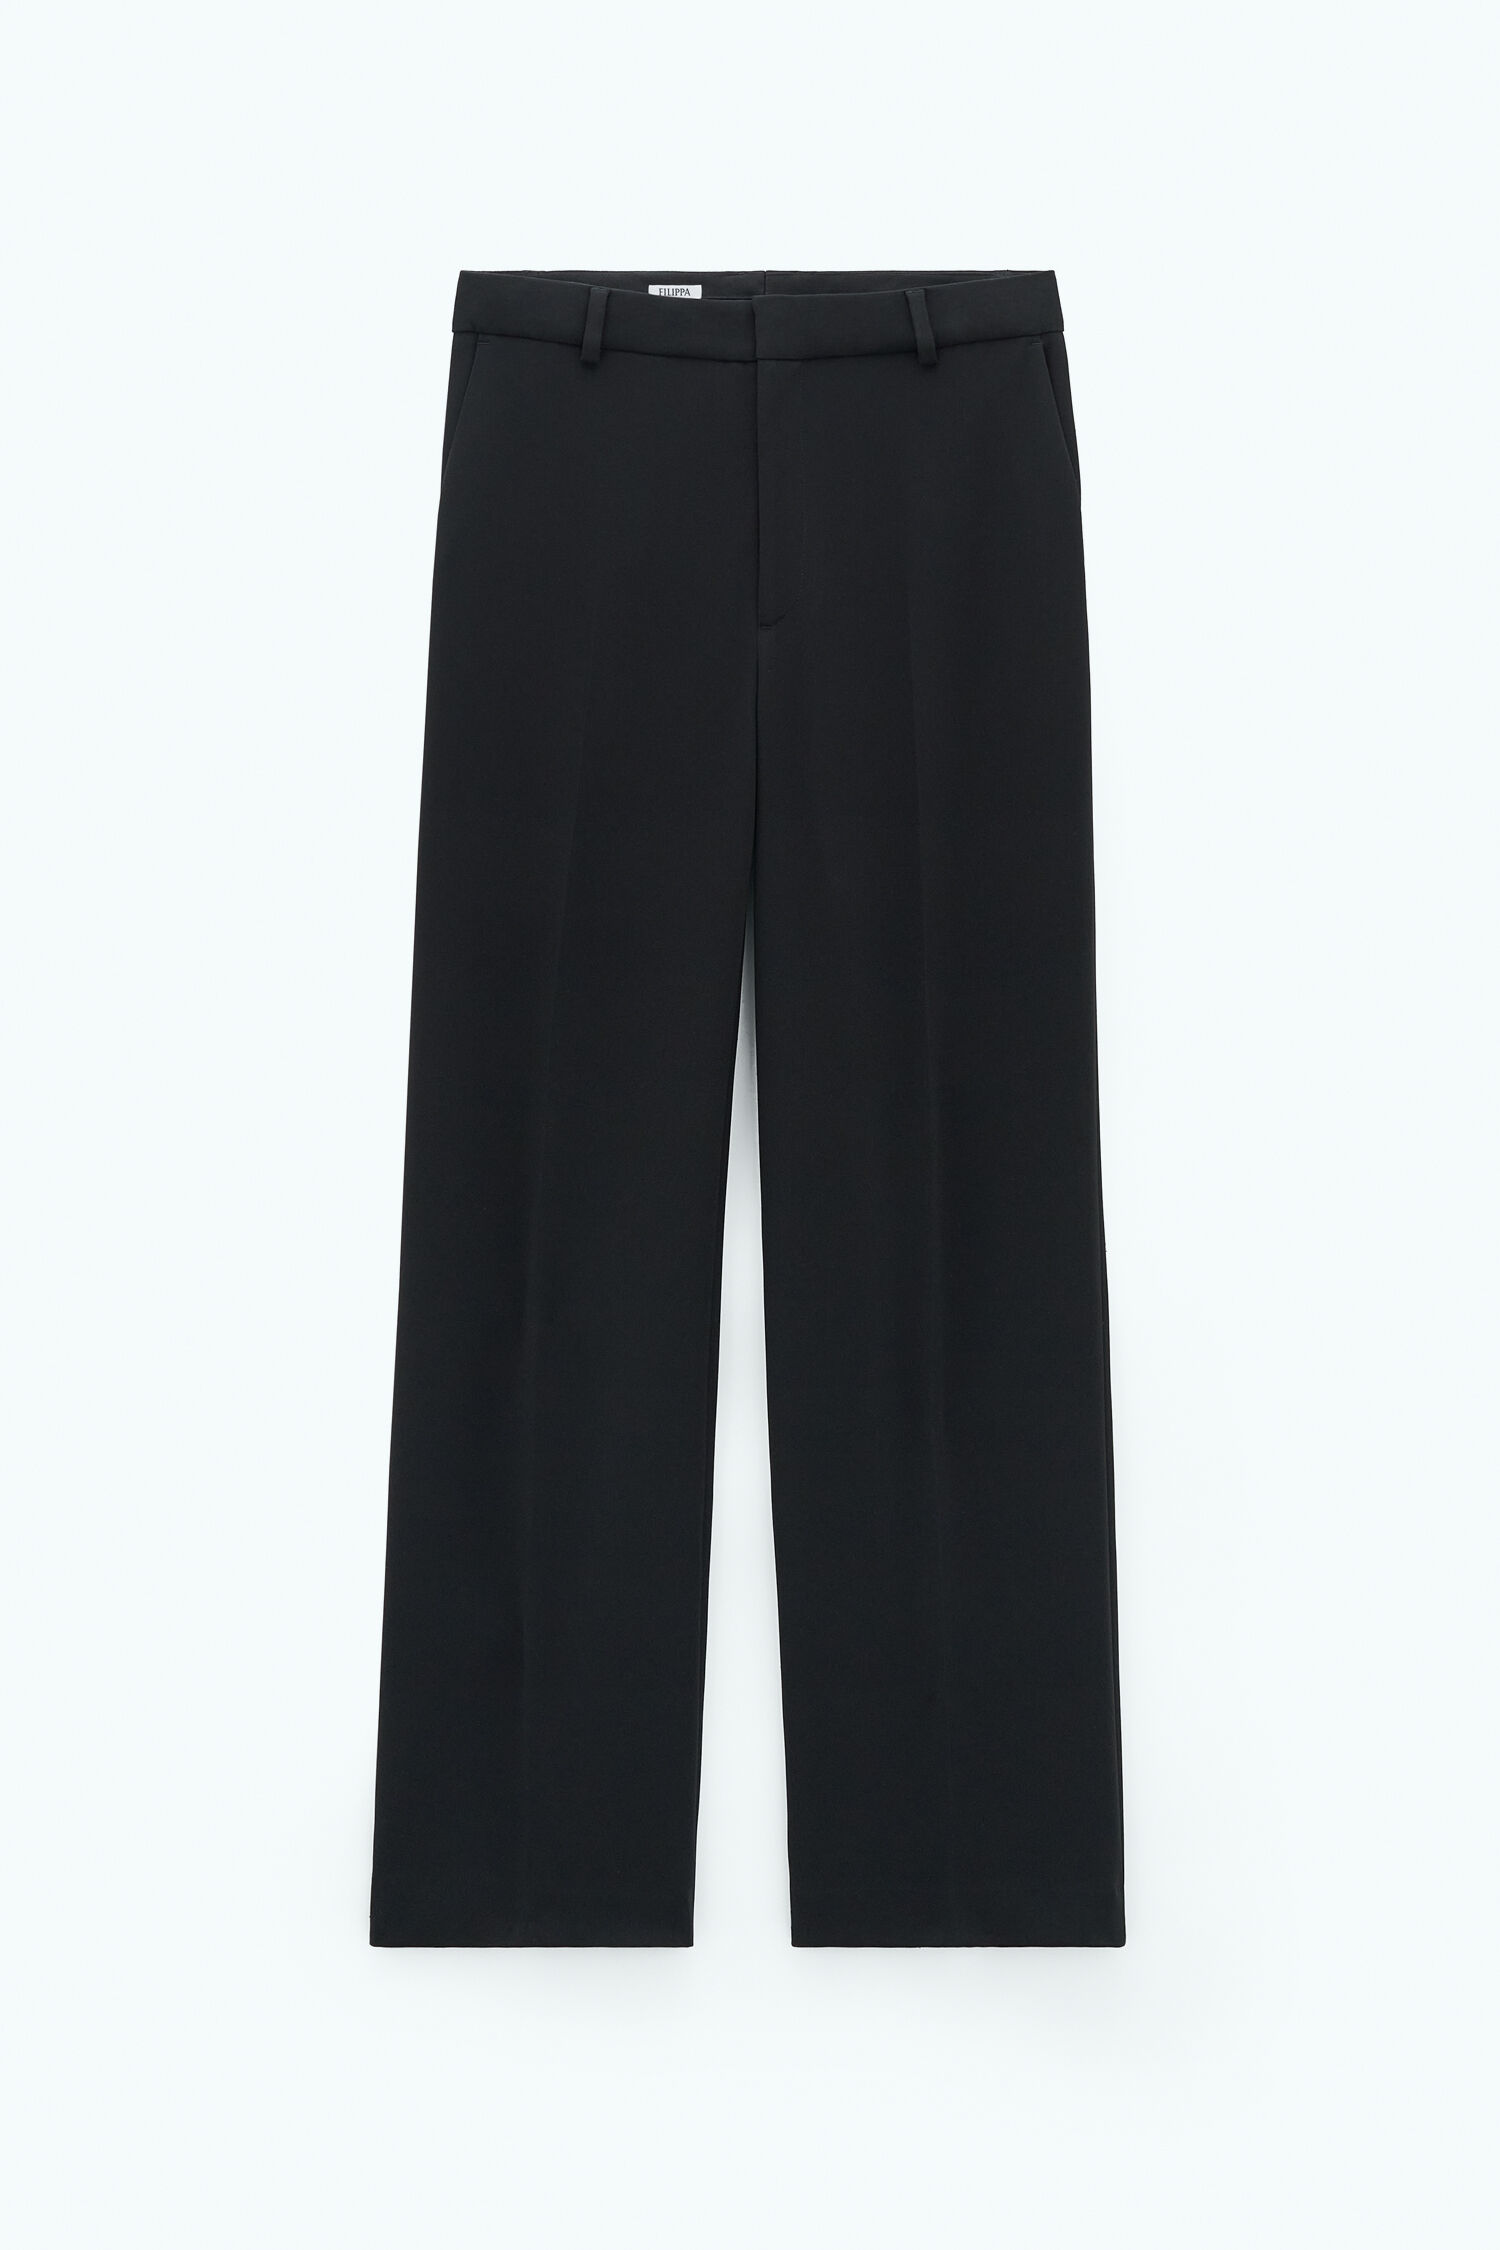 Hutton Trousers